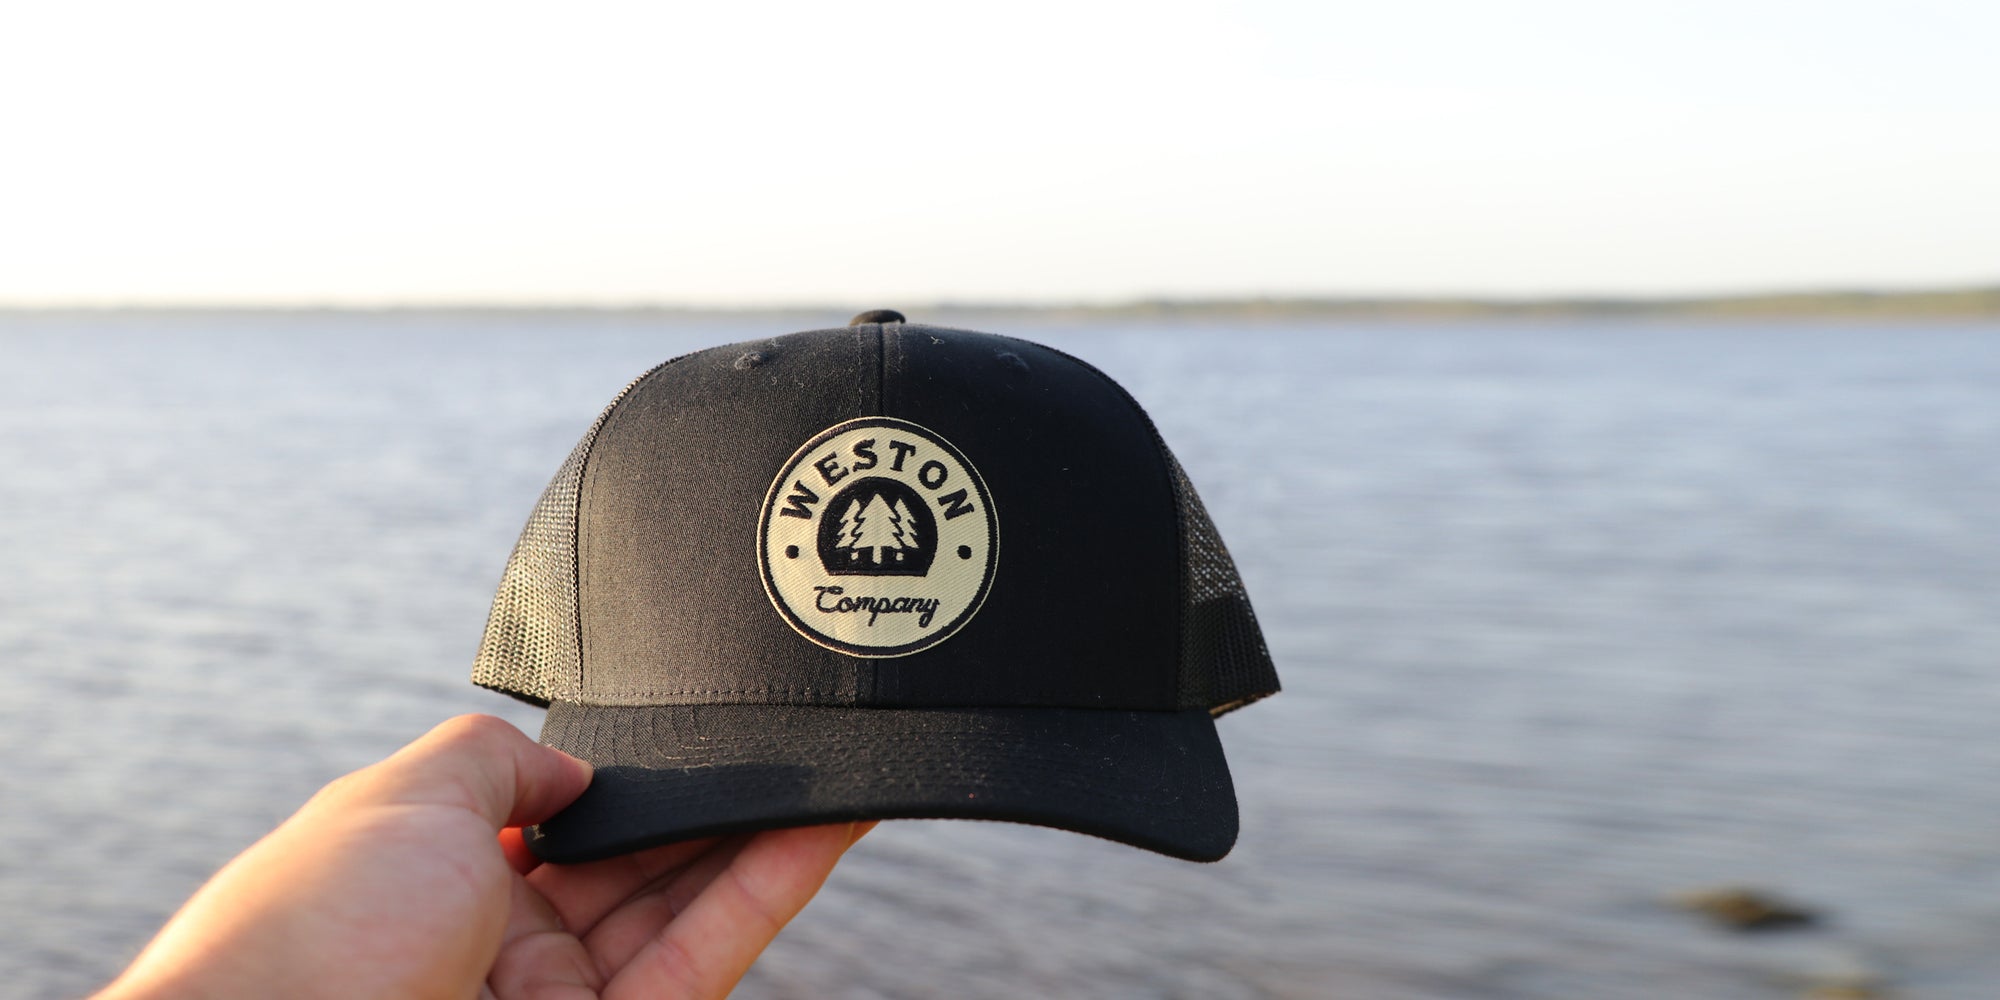 The Lake Hat Co.